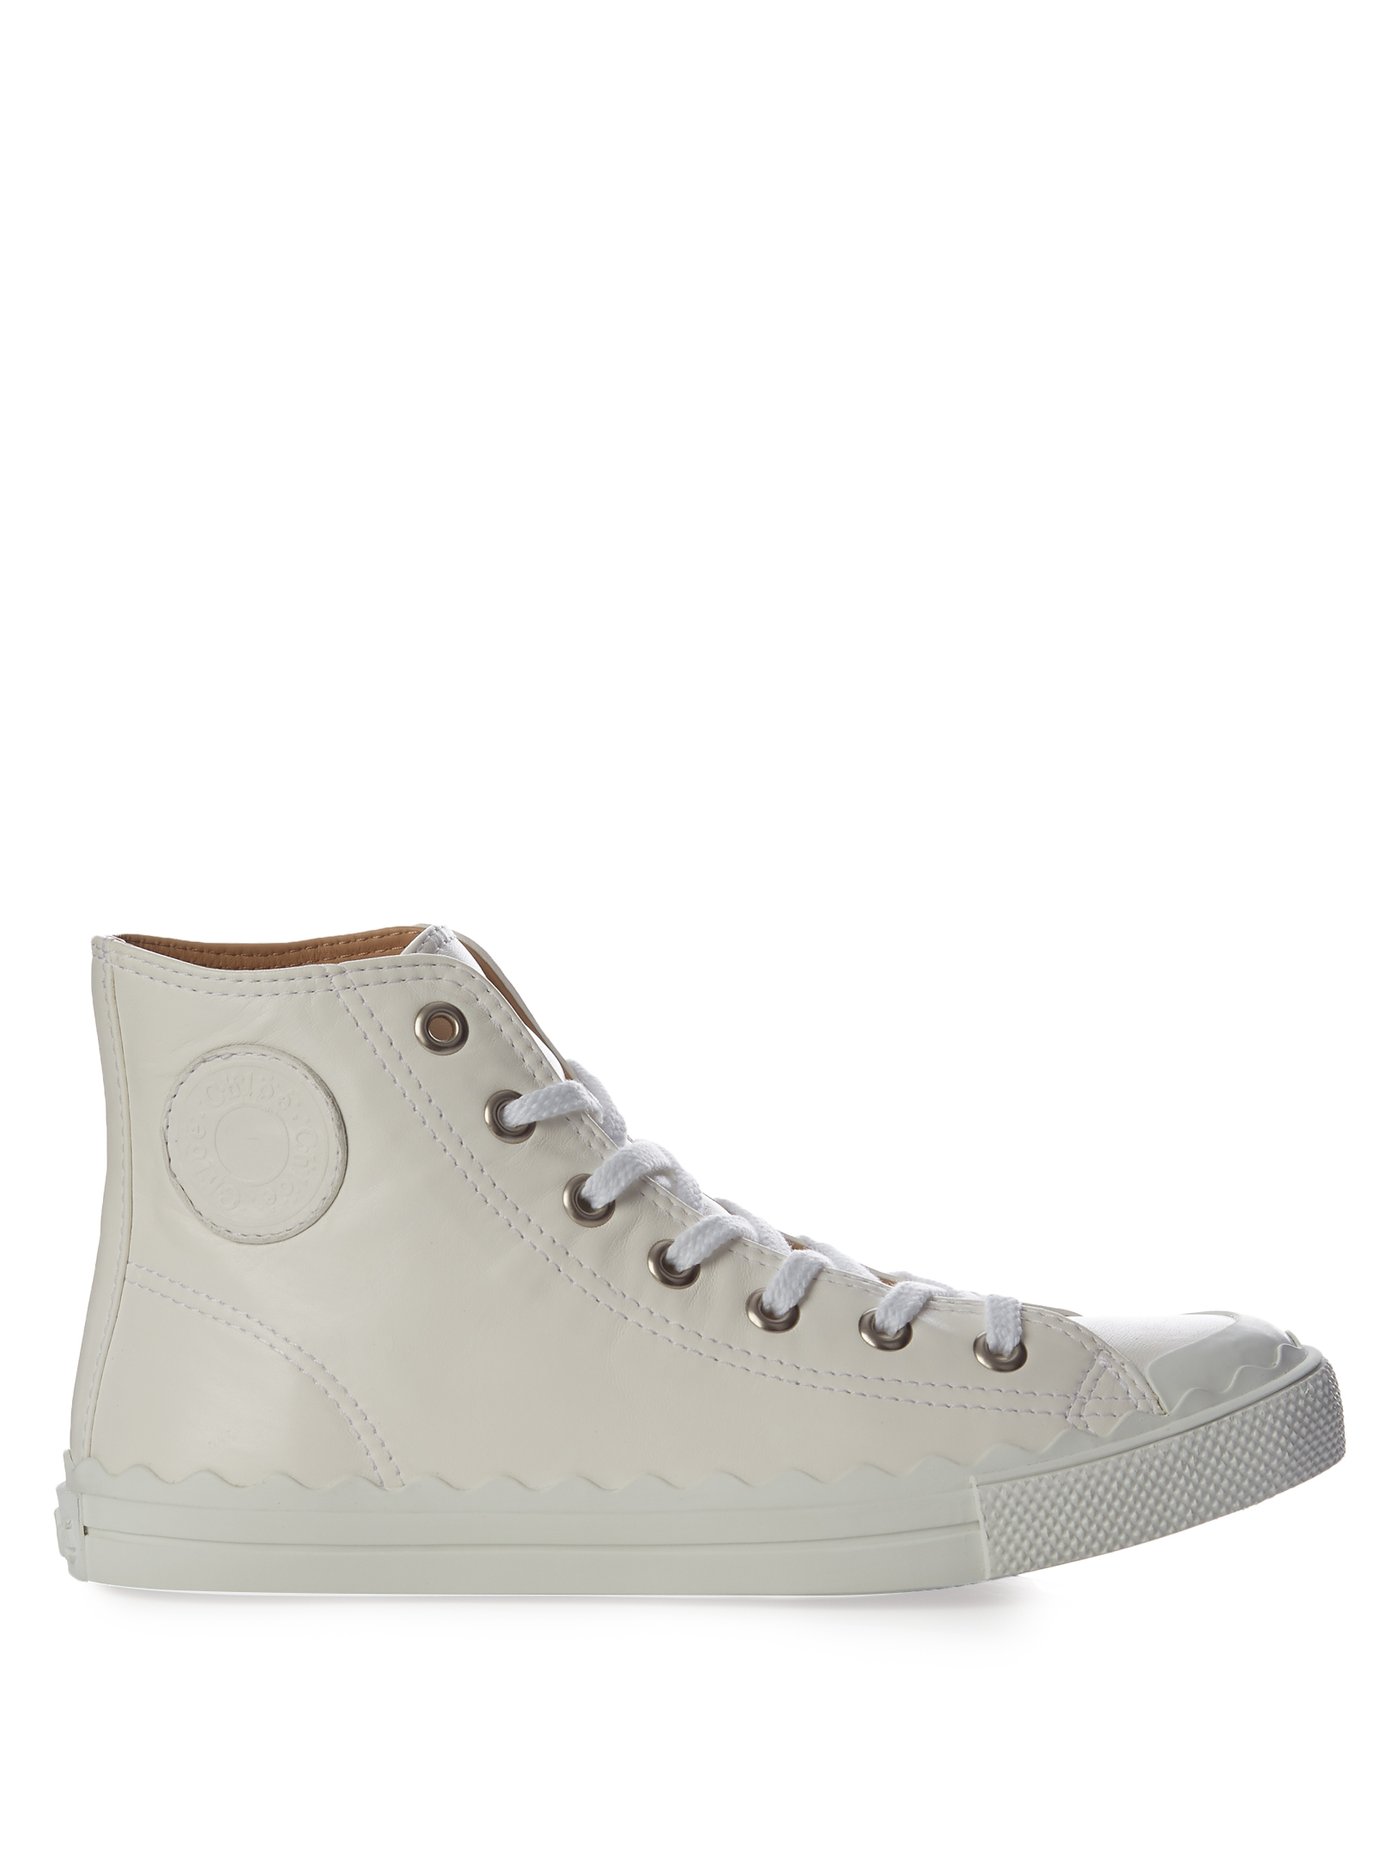 Kyle high-top leather trainers | Chloé 